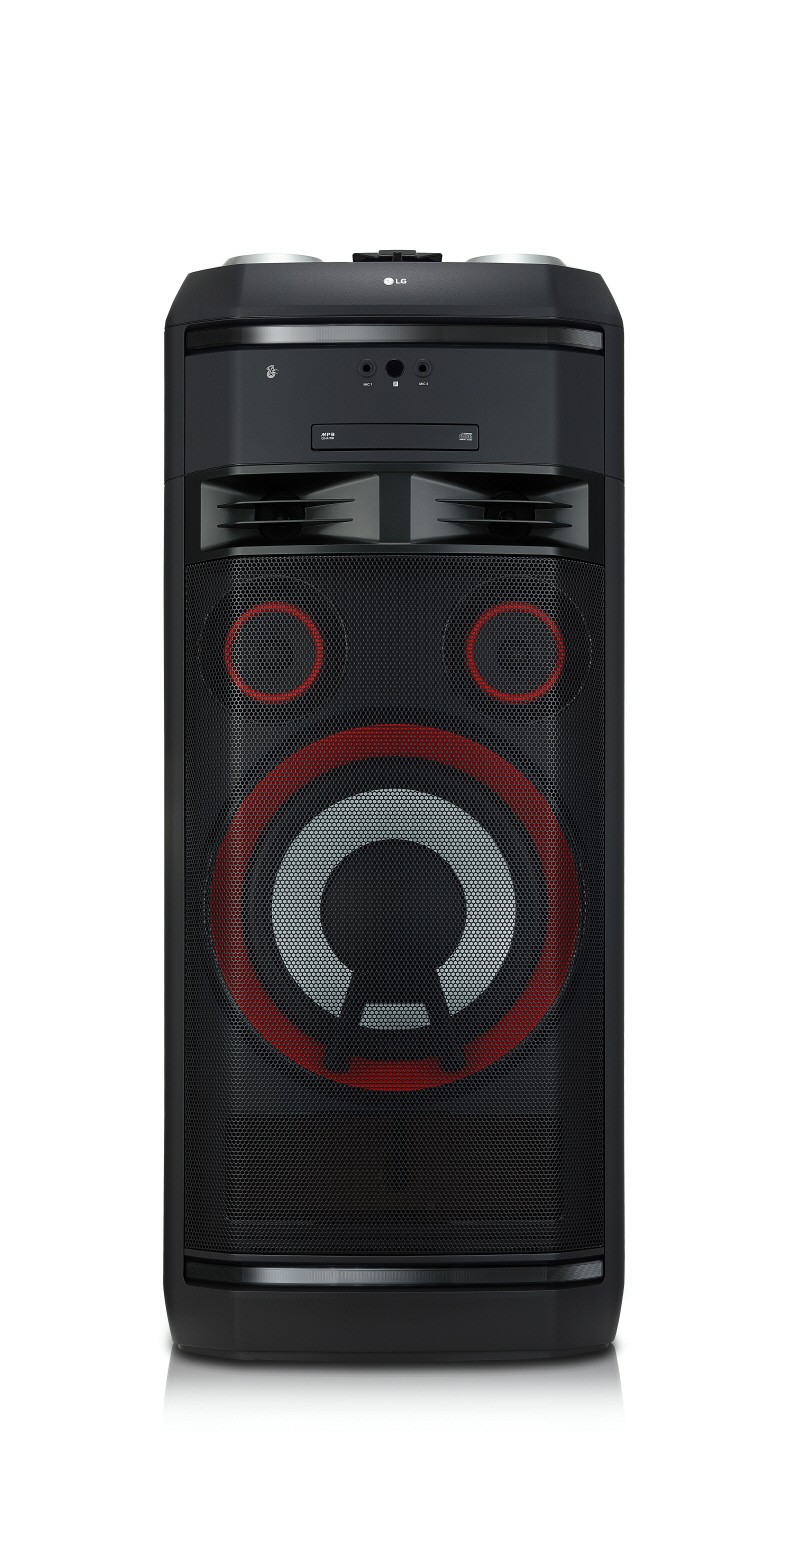 A front view of LG XBOOM model CL100